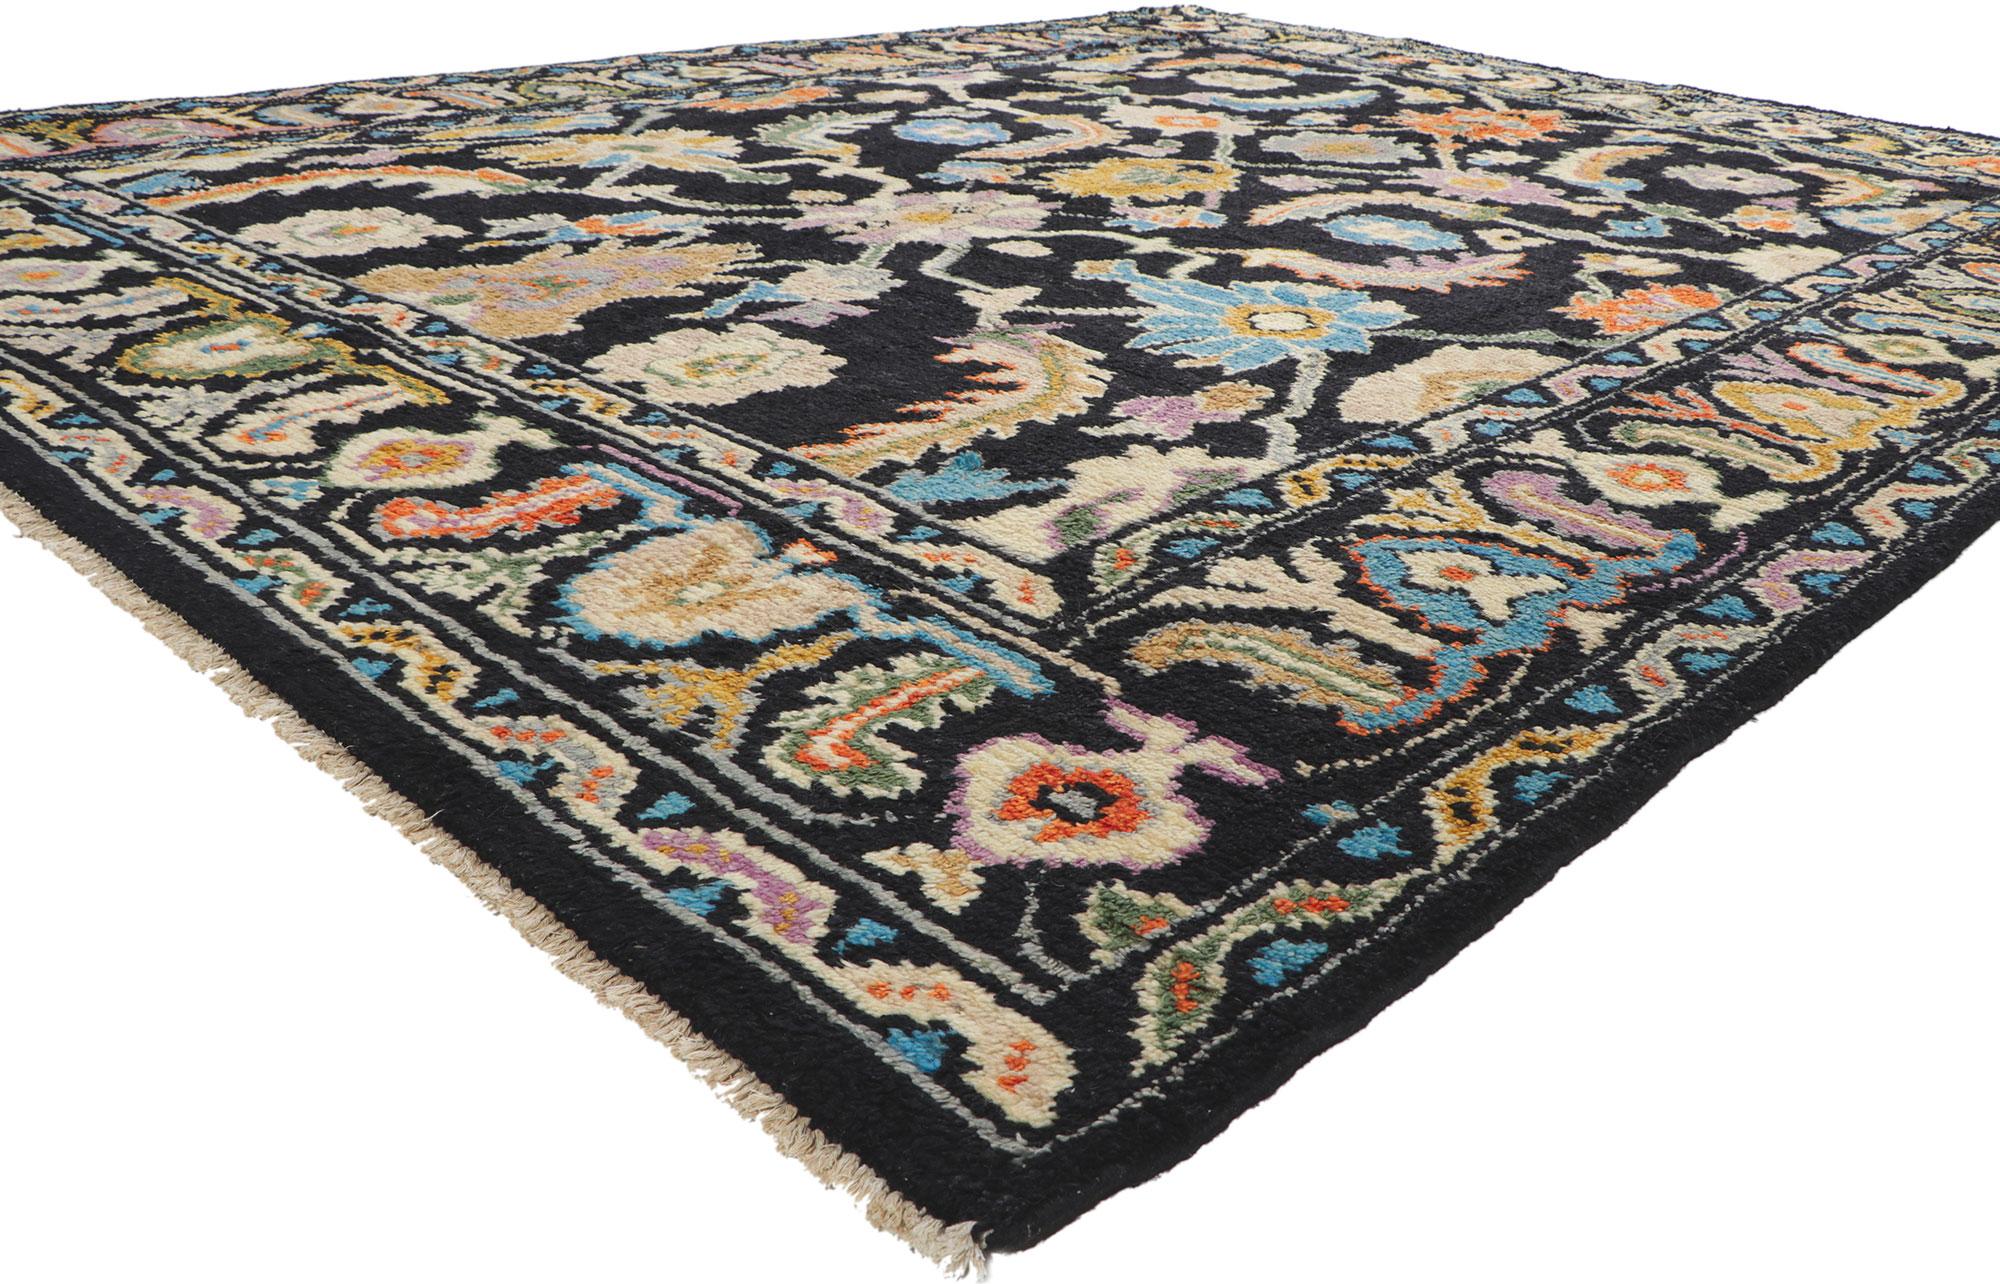 80400 Colorful Oushak Rug with Modern Style, 09’05 x 12’08. Incorporating Maximalist interior design principles, this hand-knotted wool Oushak rug epitomizes a celebration of color, pattern, and exuberance. The modern Oushak rug's expansive